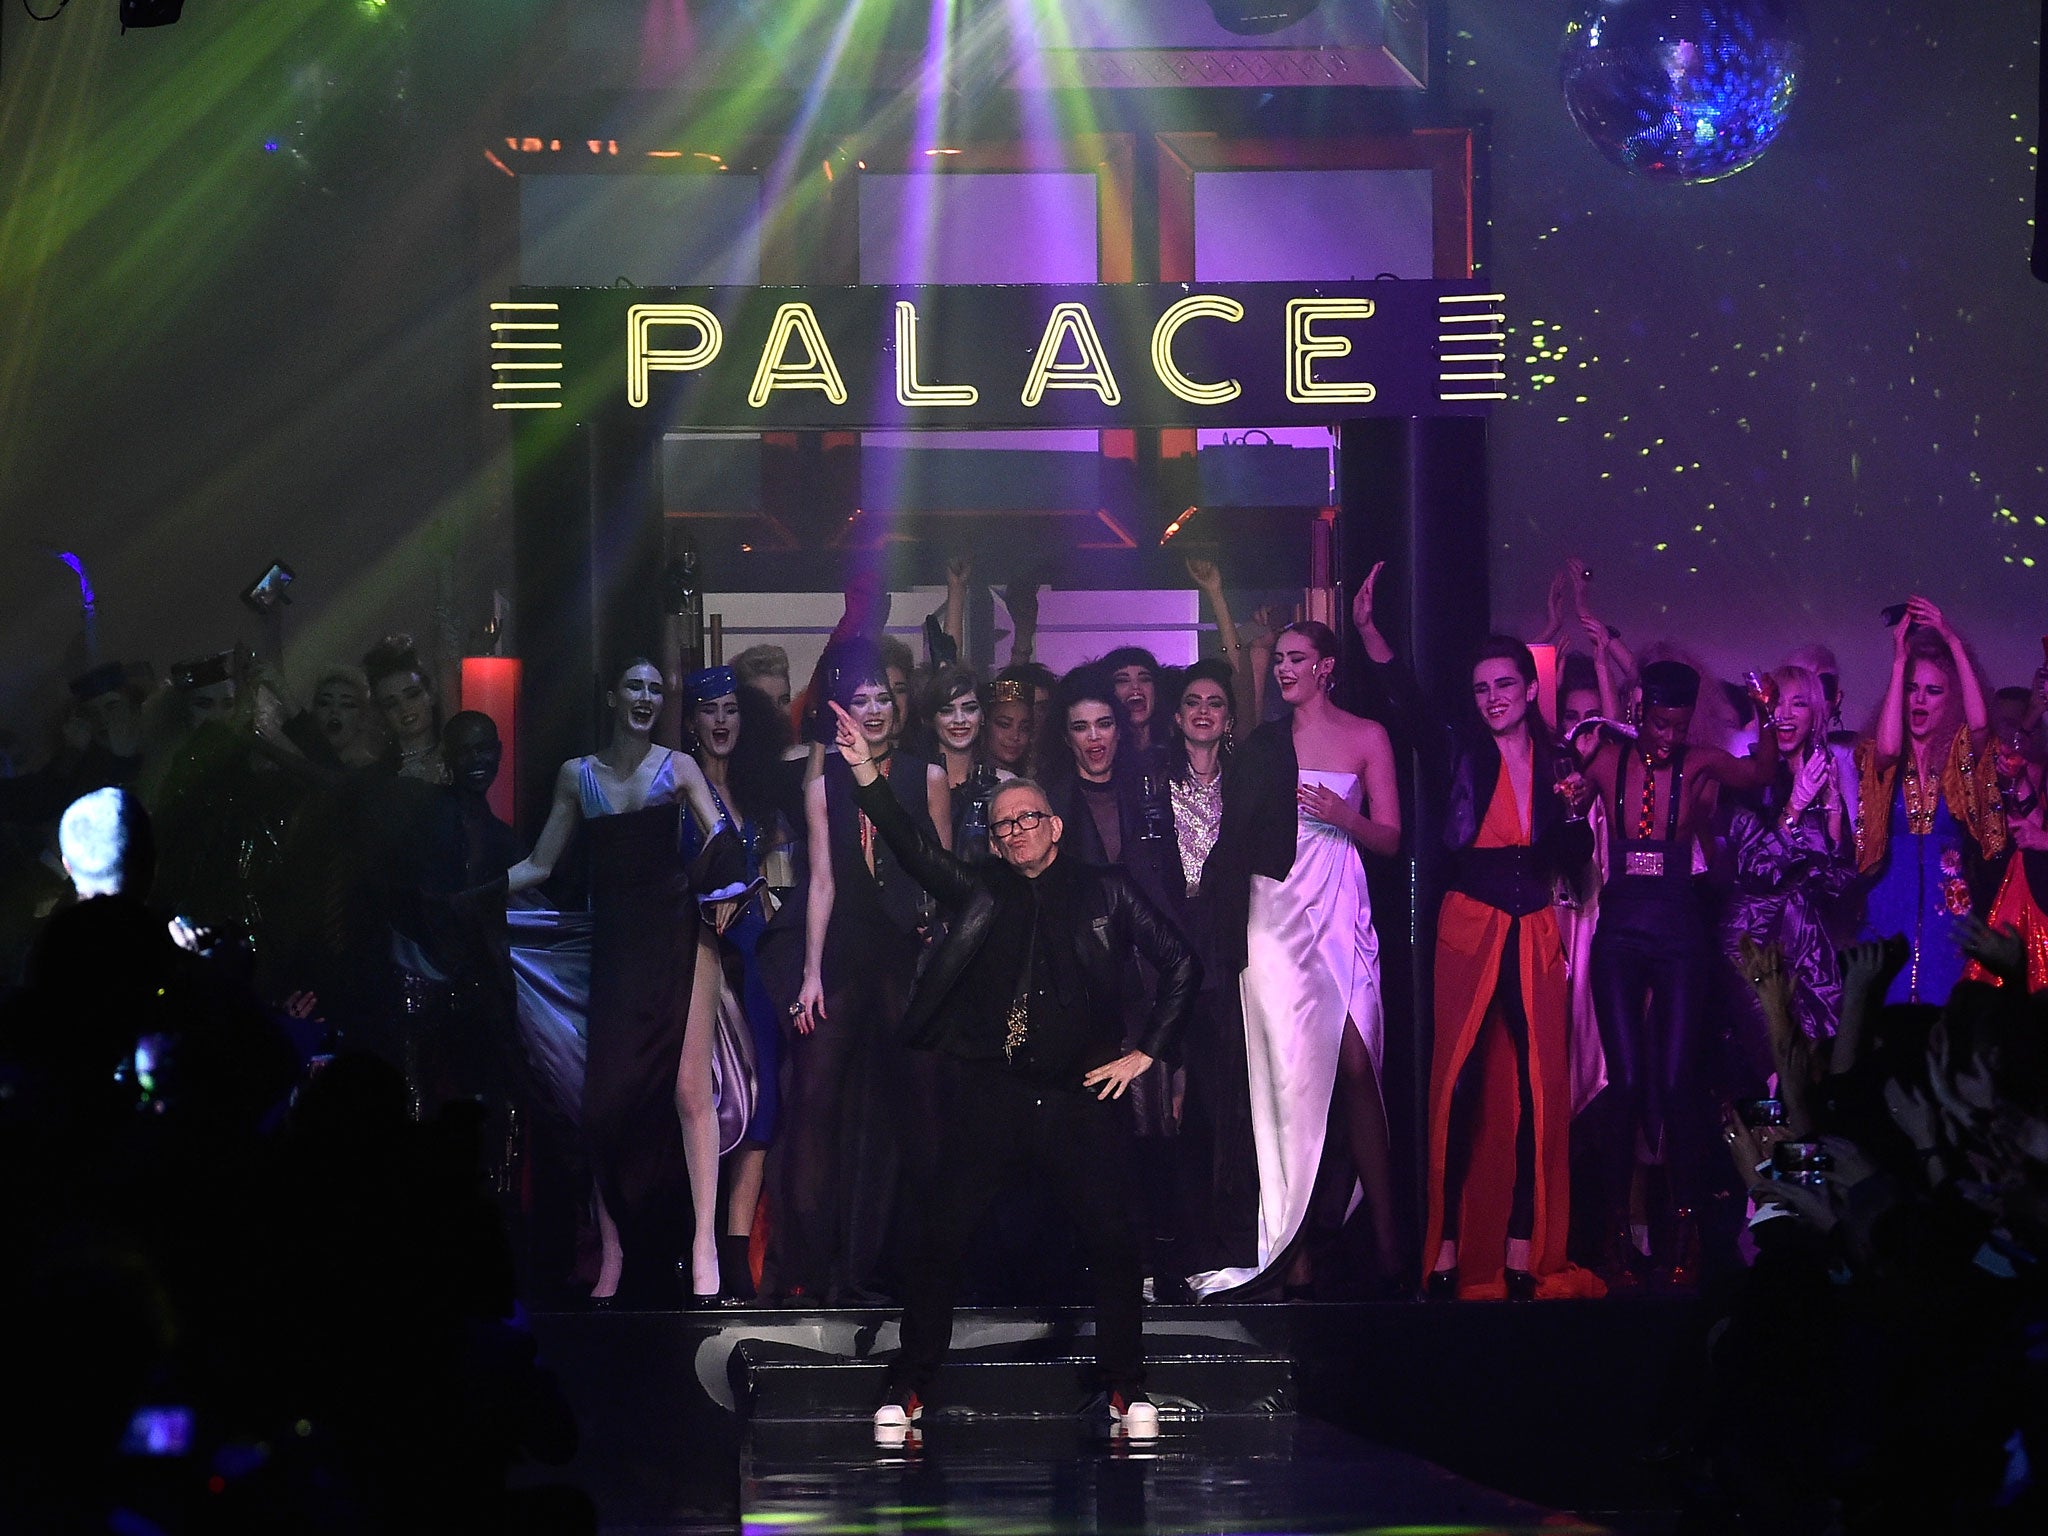 Jean Paul Gaultier devoted his January haute couture show to the hedonistic hot-spot of Le Palace